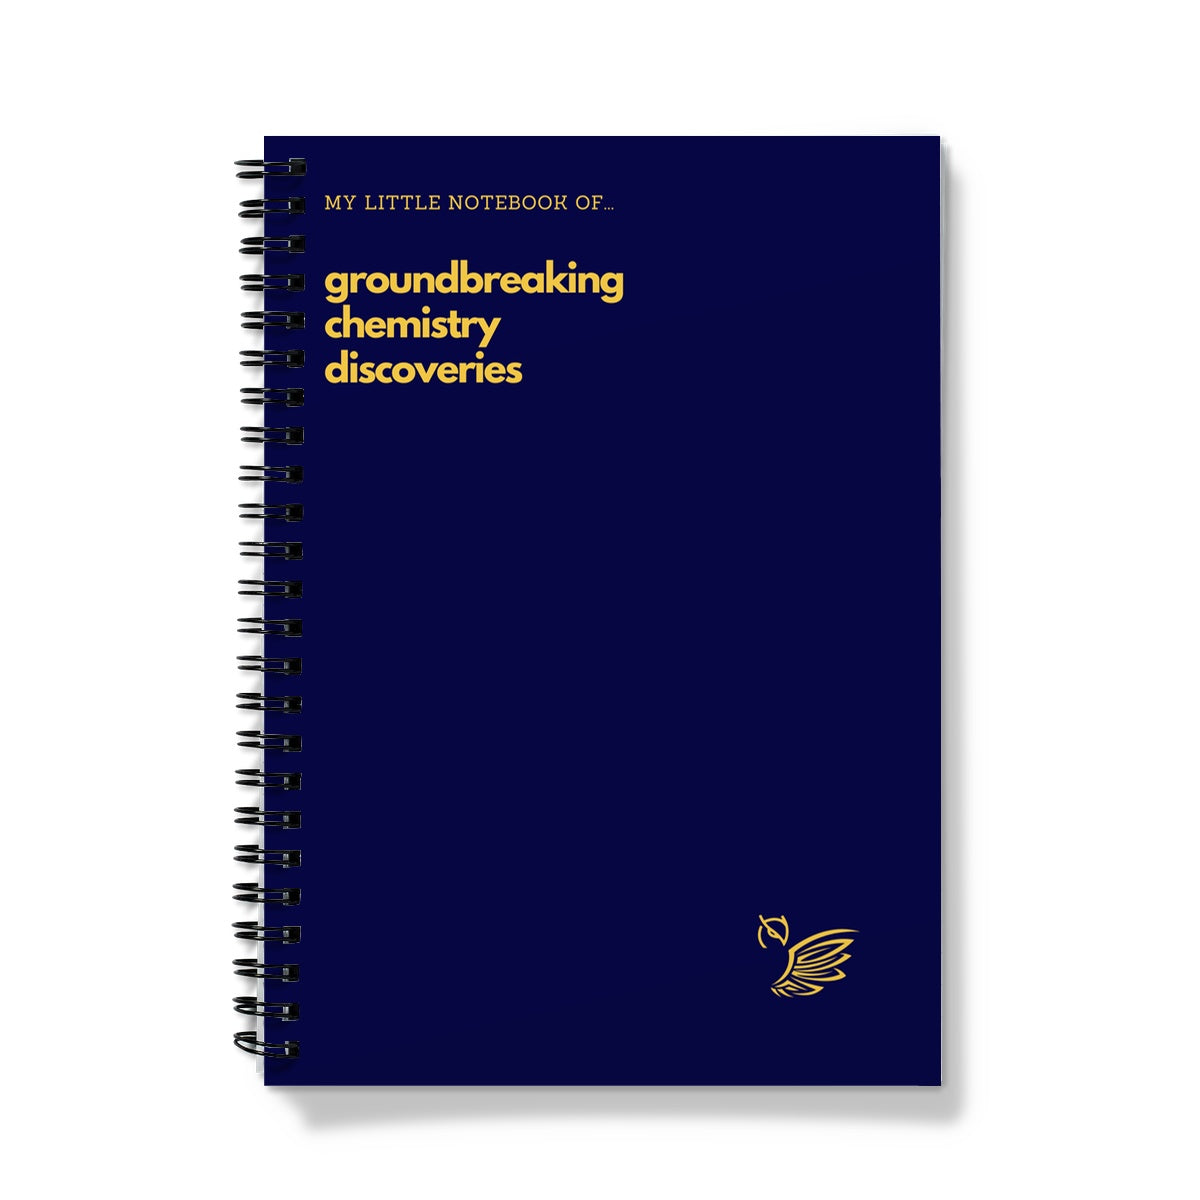 My Little Notebook Of... Groundbreaking Chemistry Discoveries Notebook